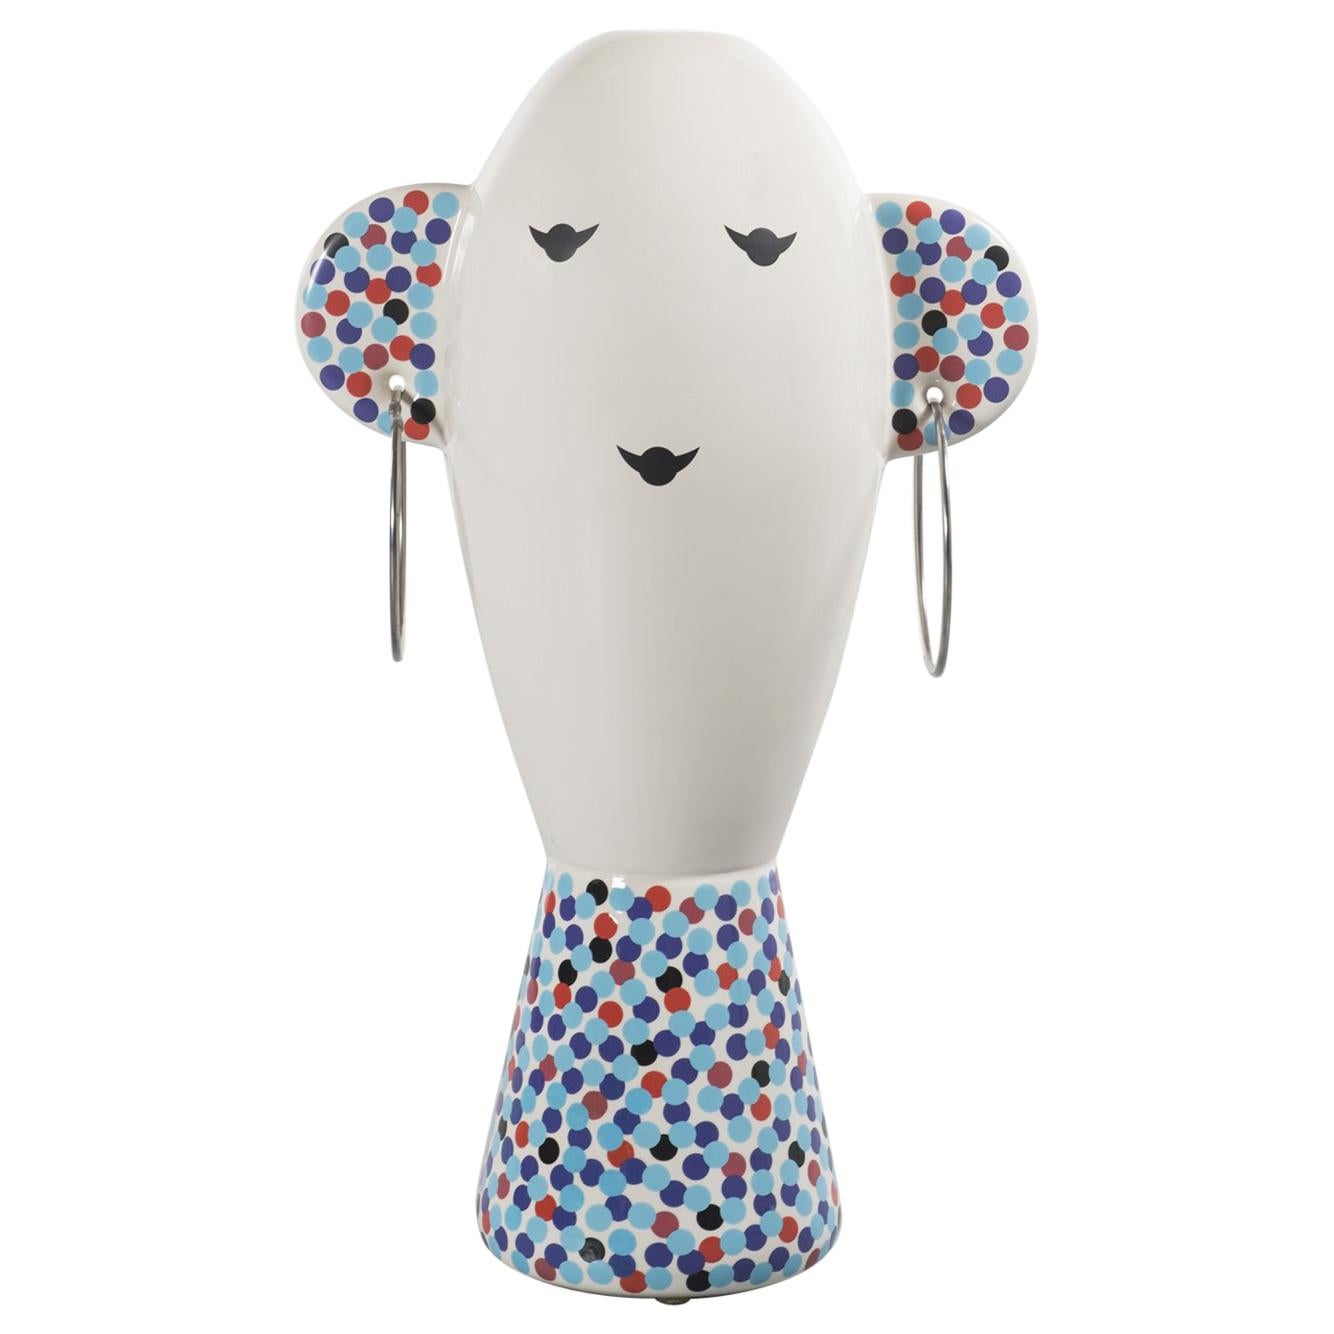 Rare Vaso Viso TOTEM by Alessandro Mendini for Alessi Limited Edition